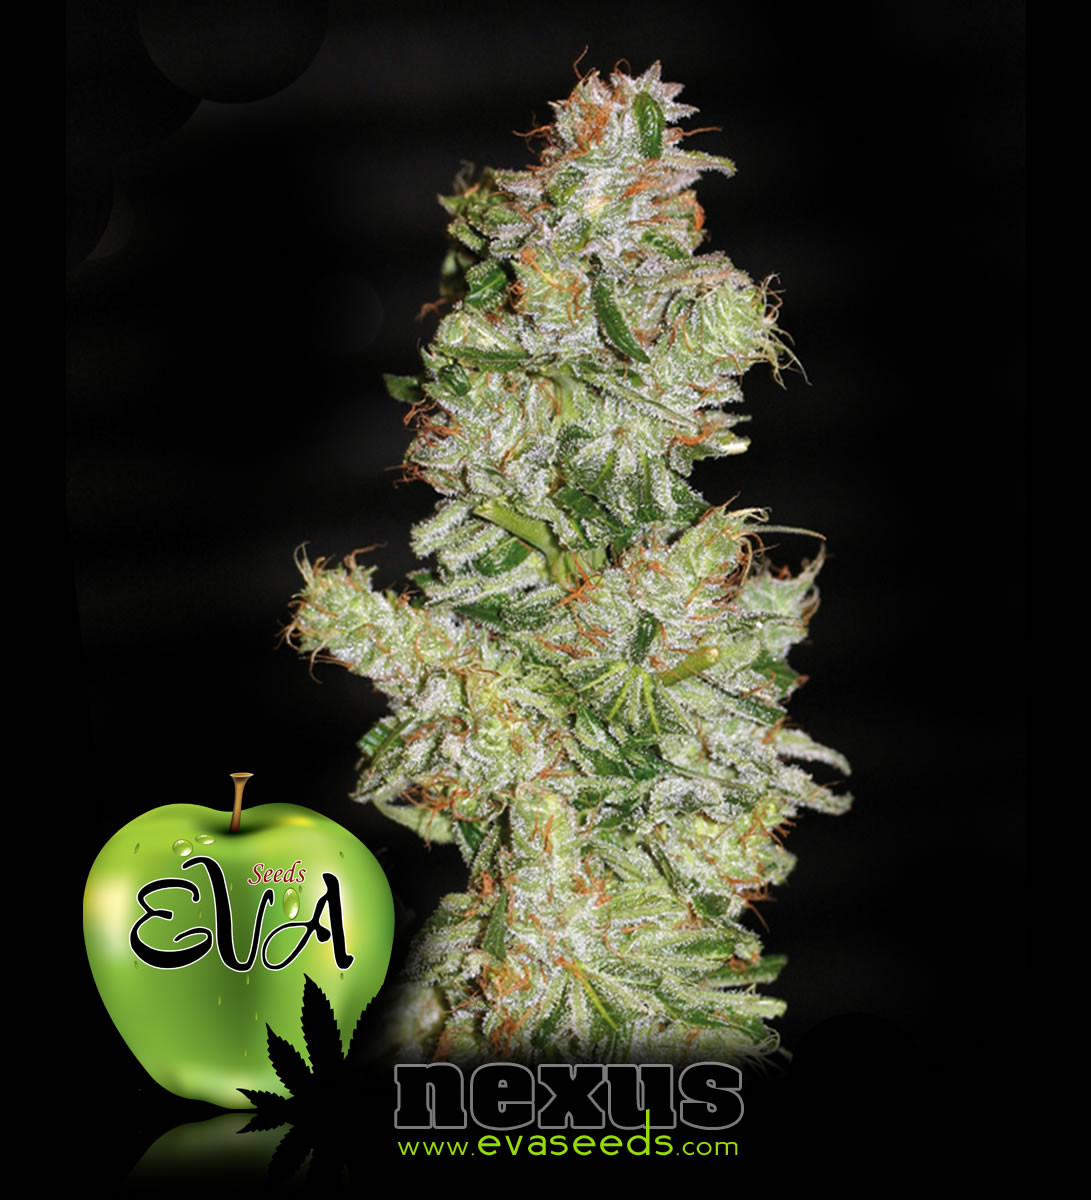 Nexus 3 seeds - All Products - Root Catalog